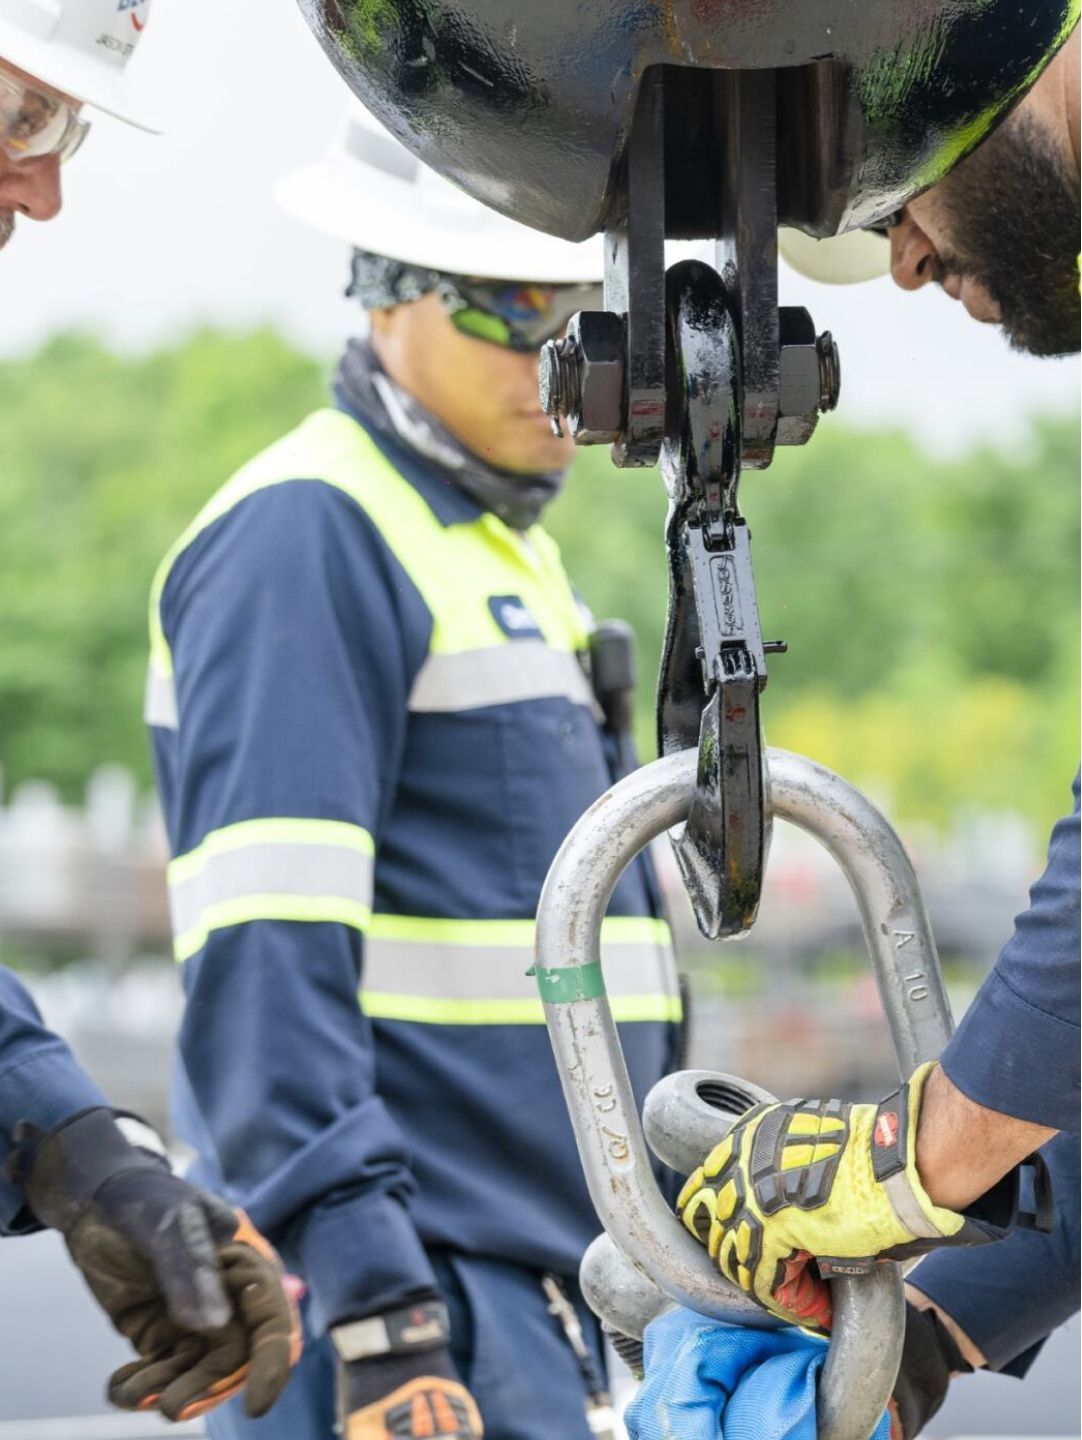 Three people in safety gear working together on a project.